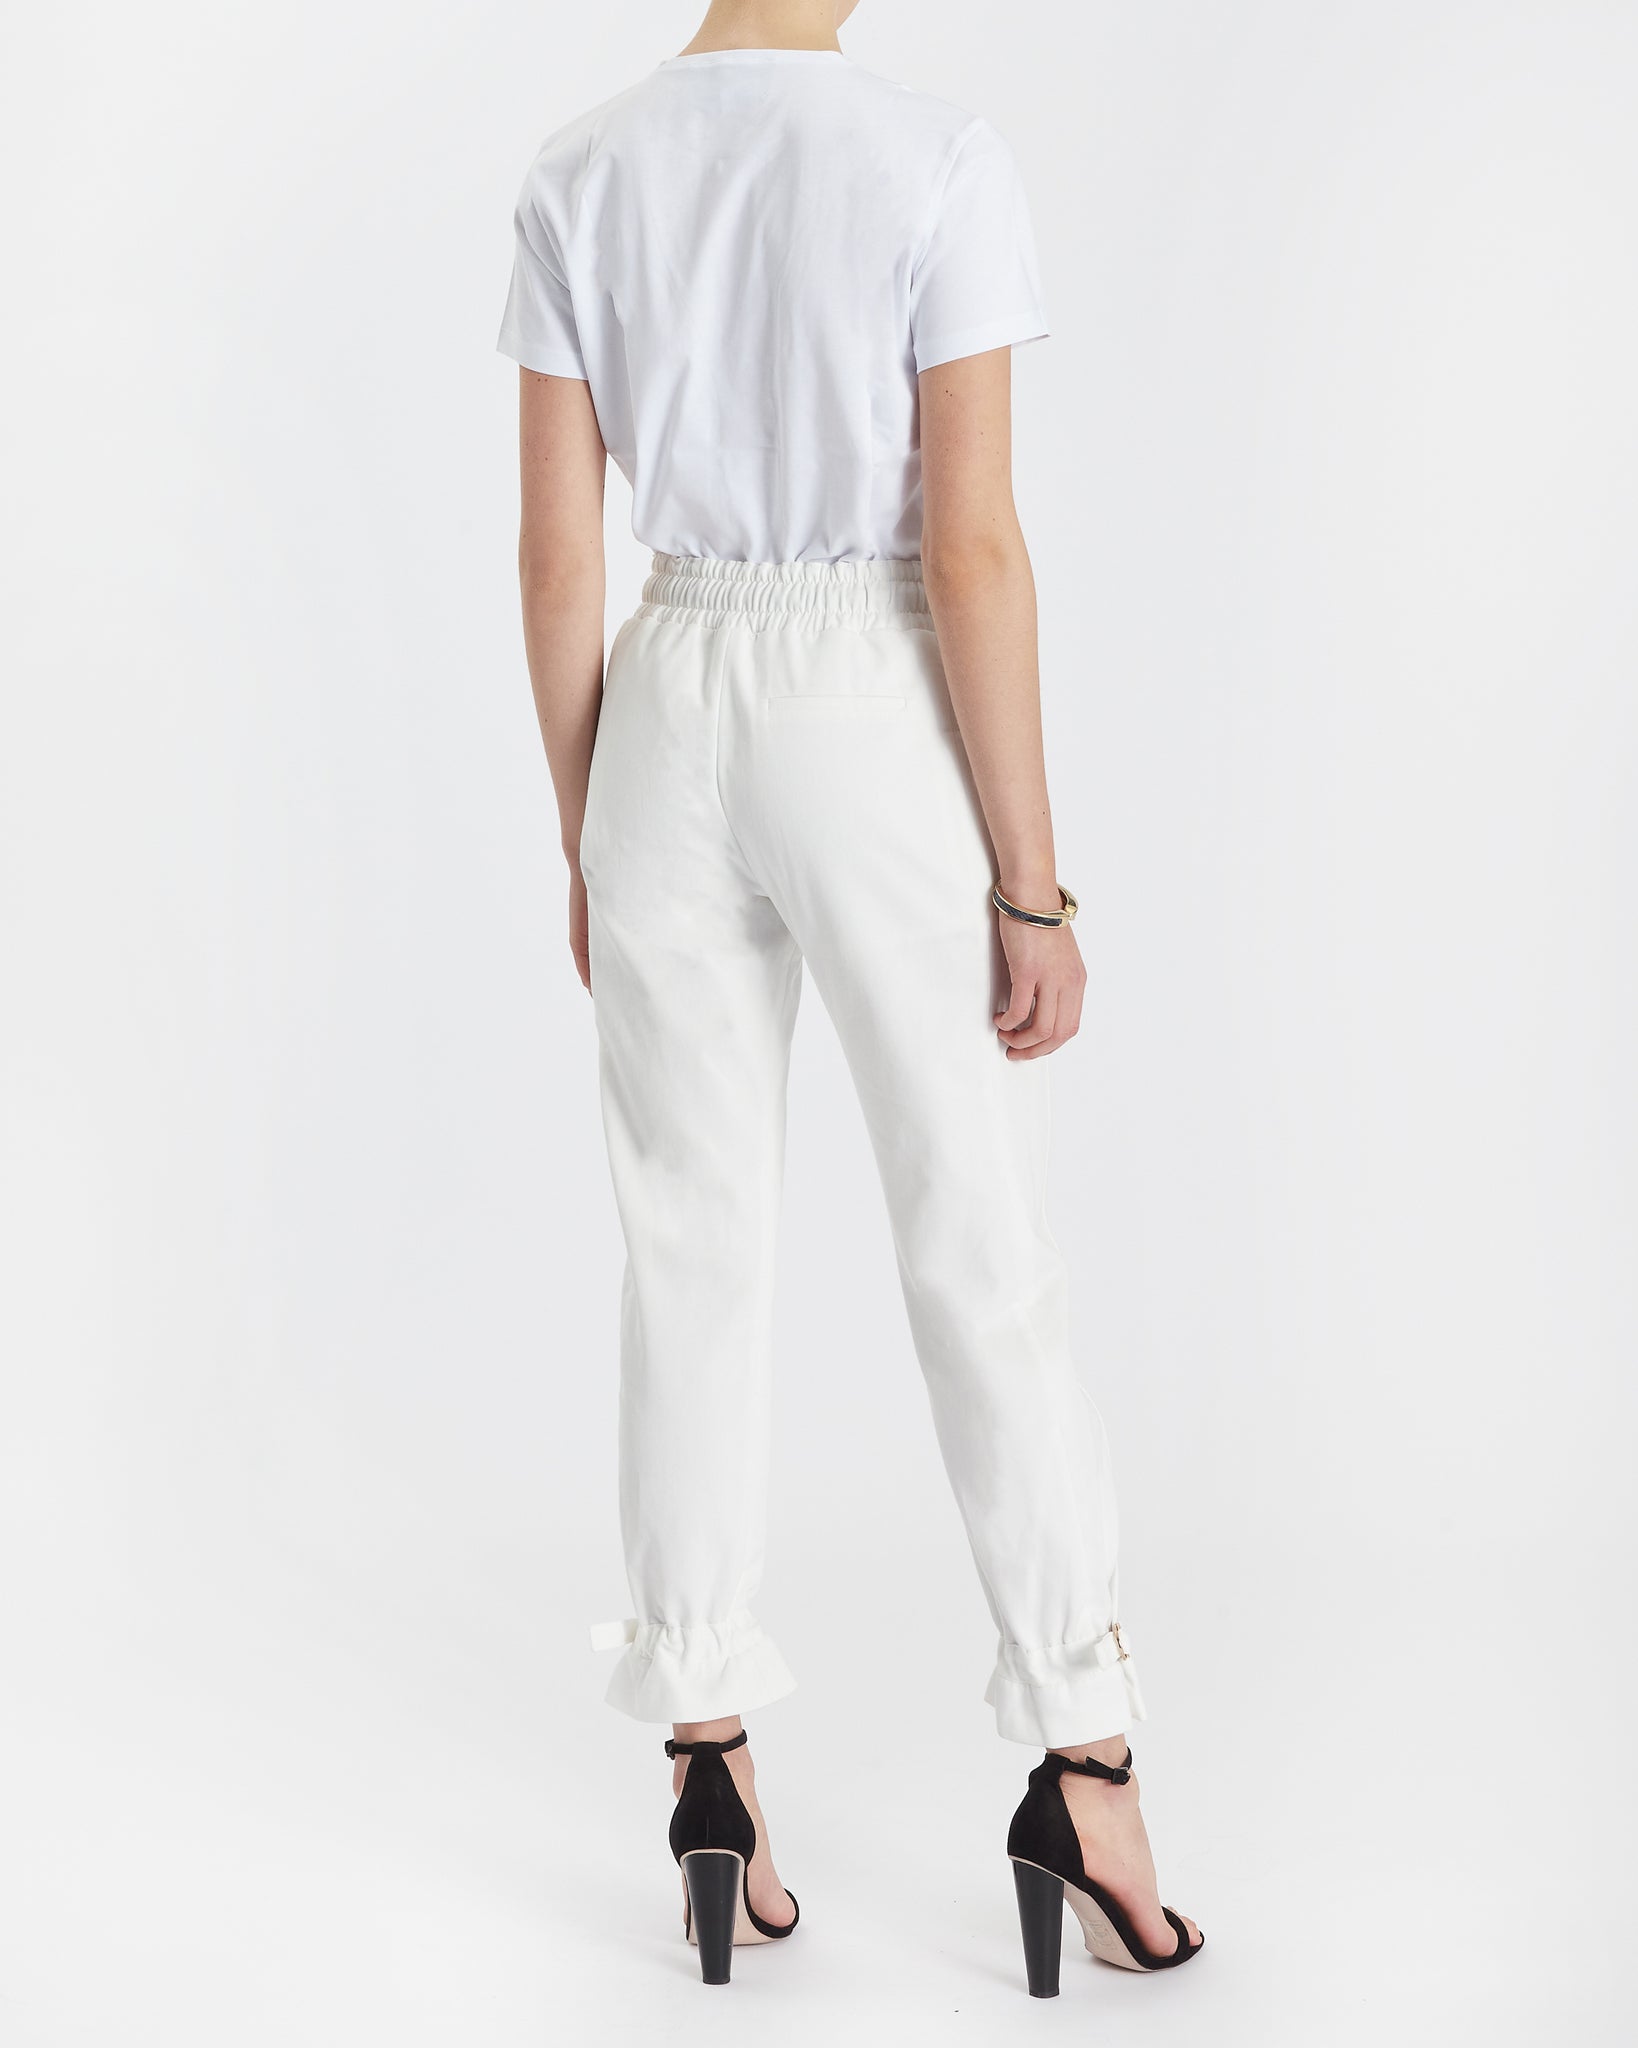 Gaby CASUAL JOGGER - OFF WHITE